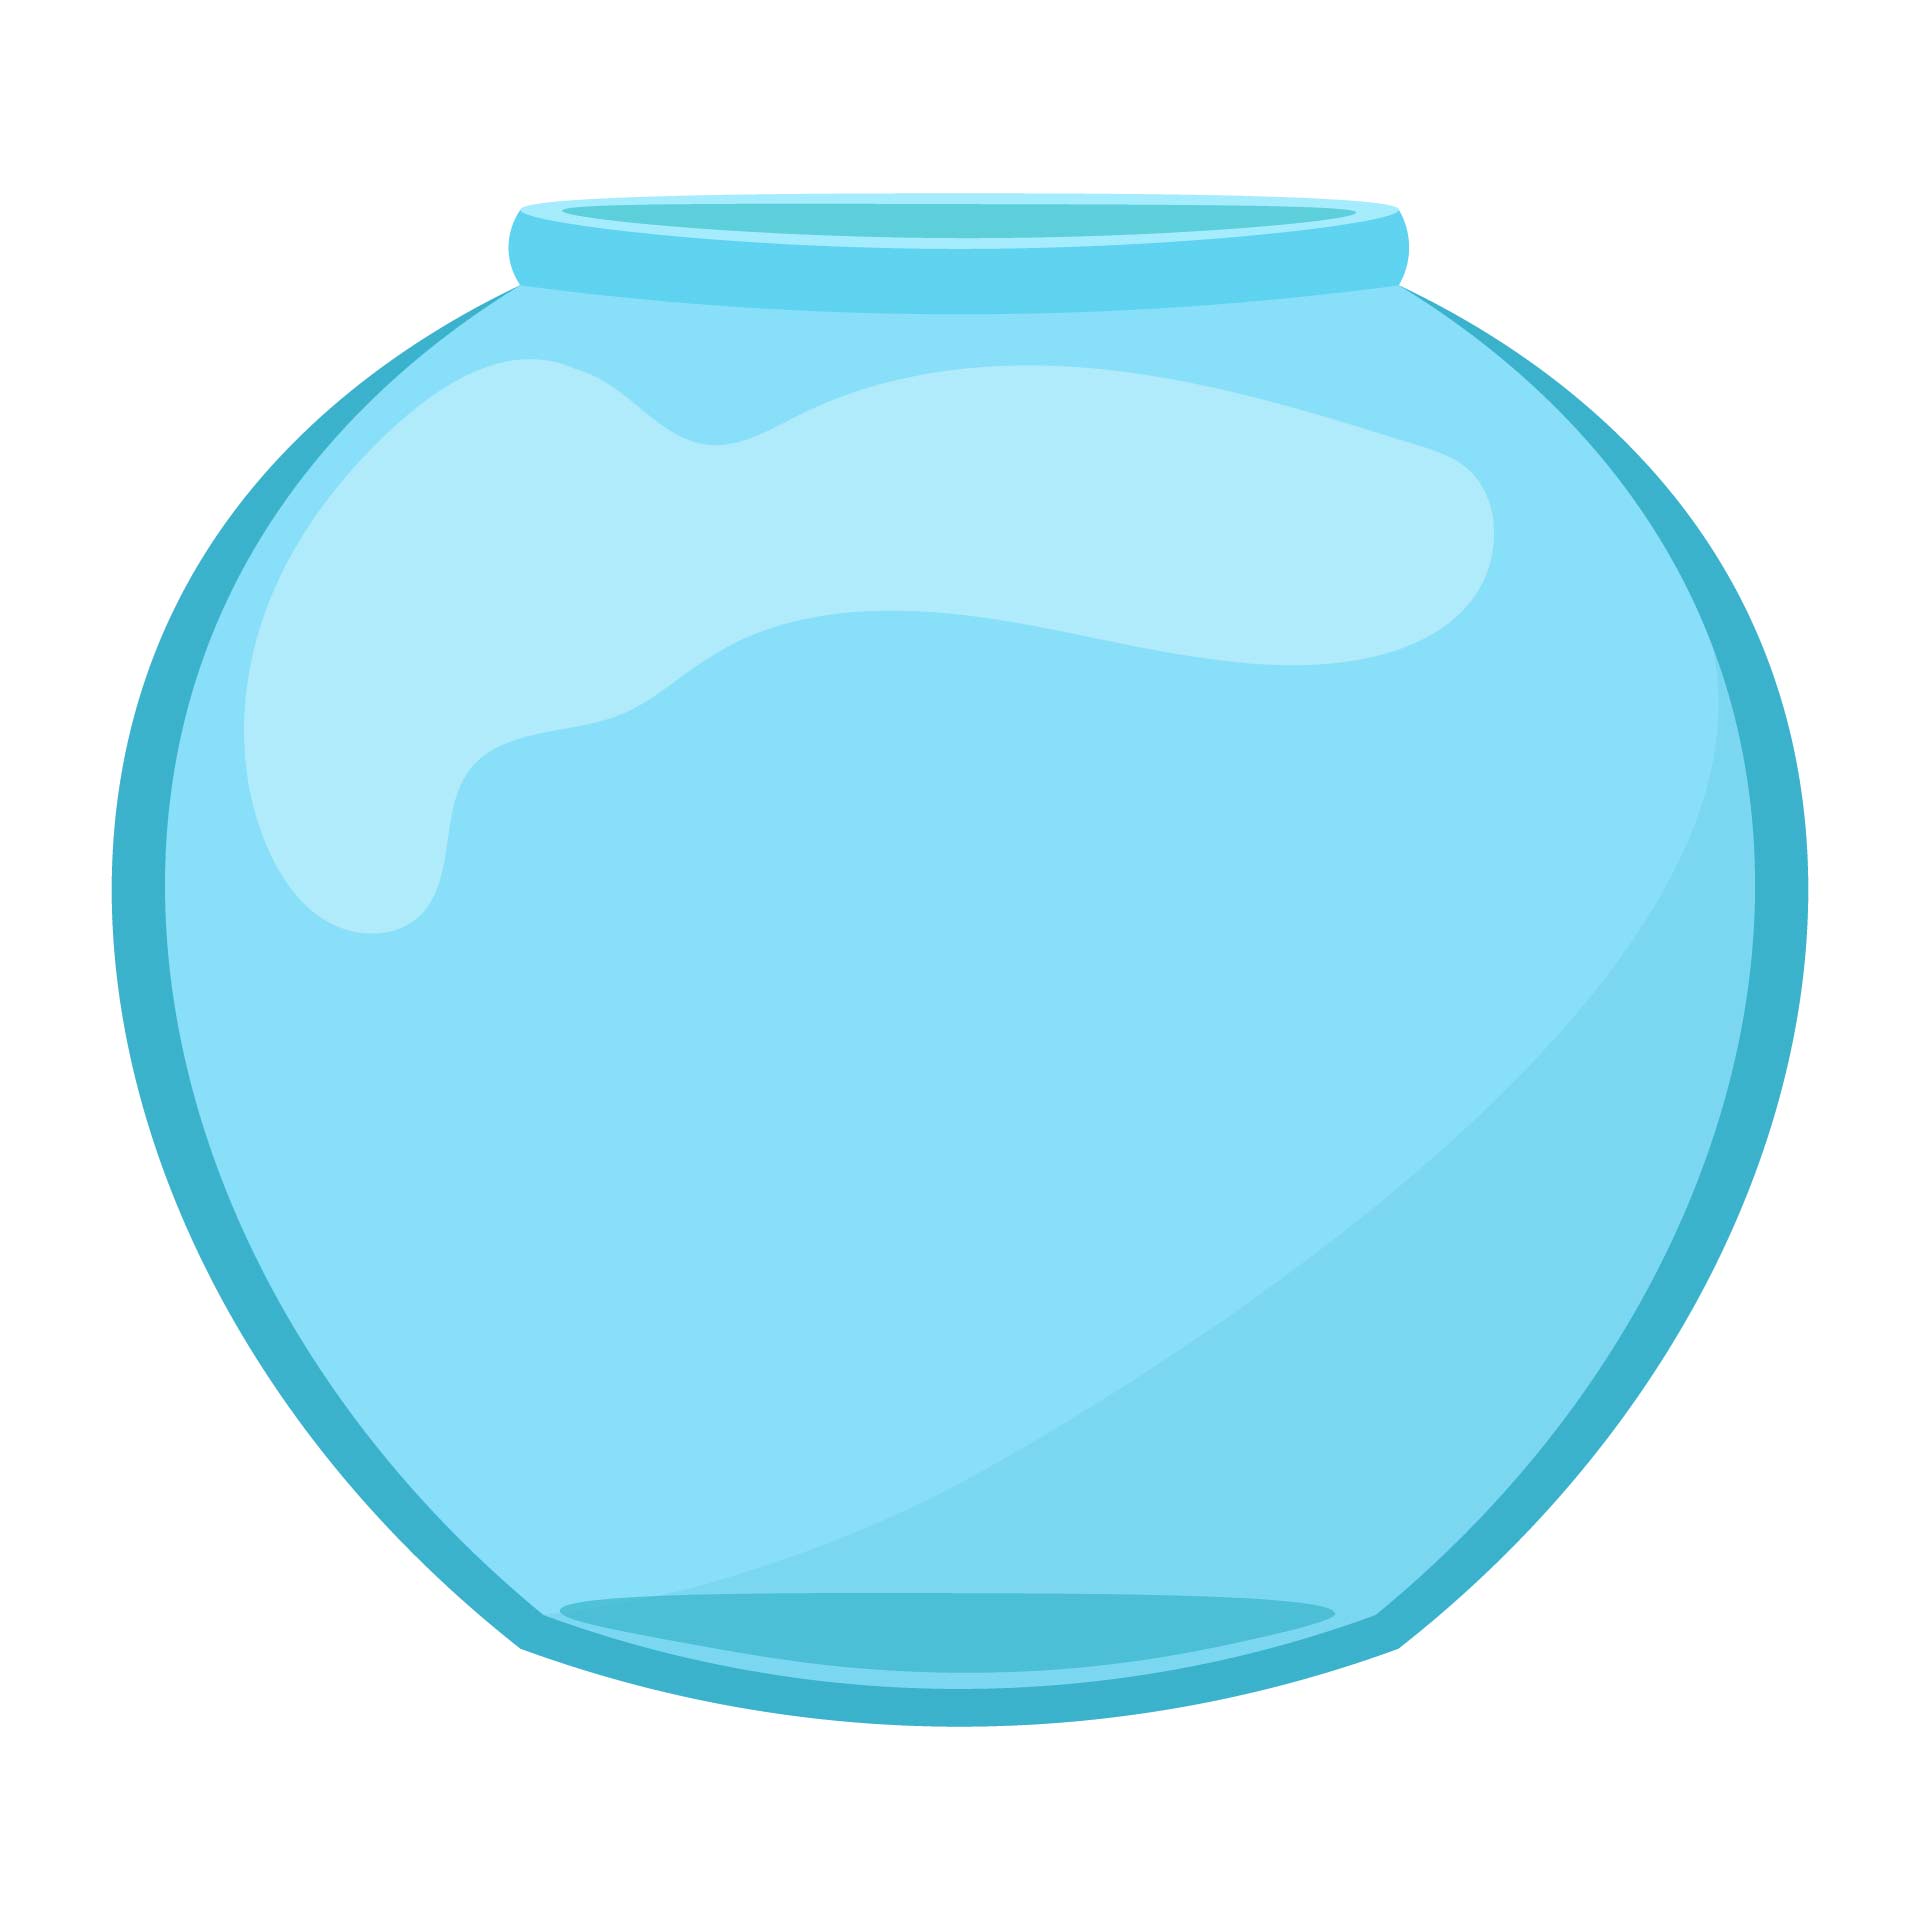 6-best-images-of-fish-bowl-template-printable-fish-bowl-template